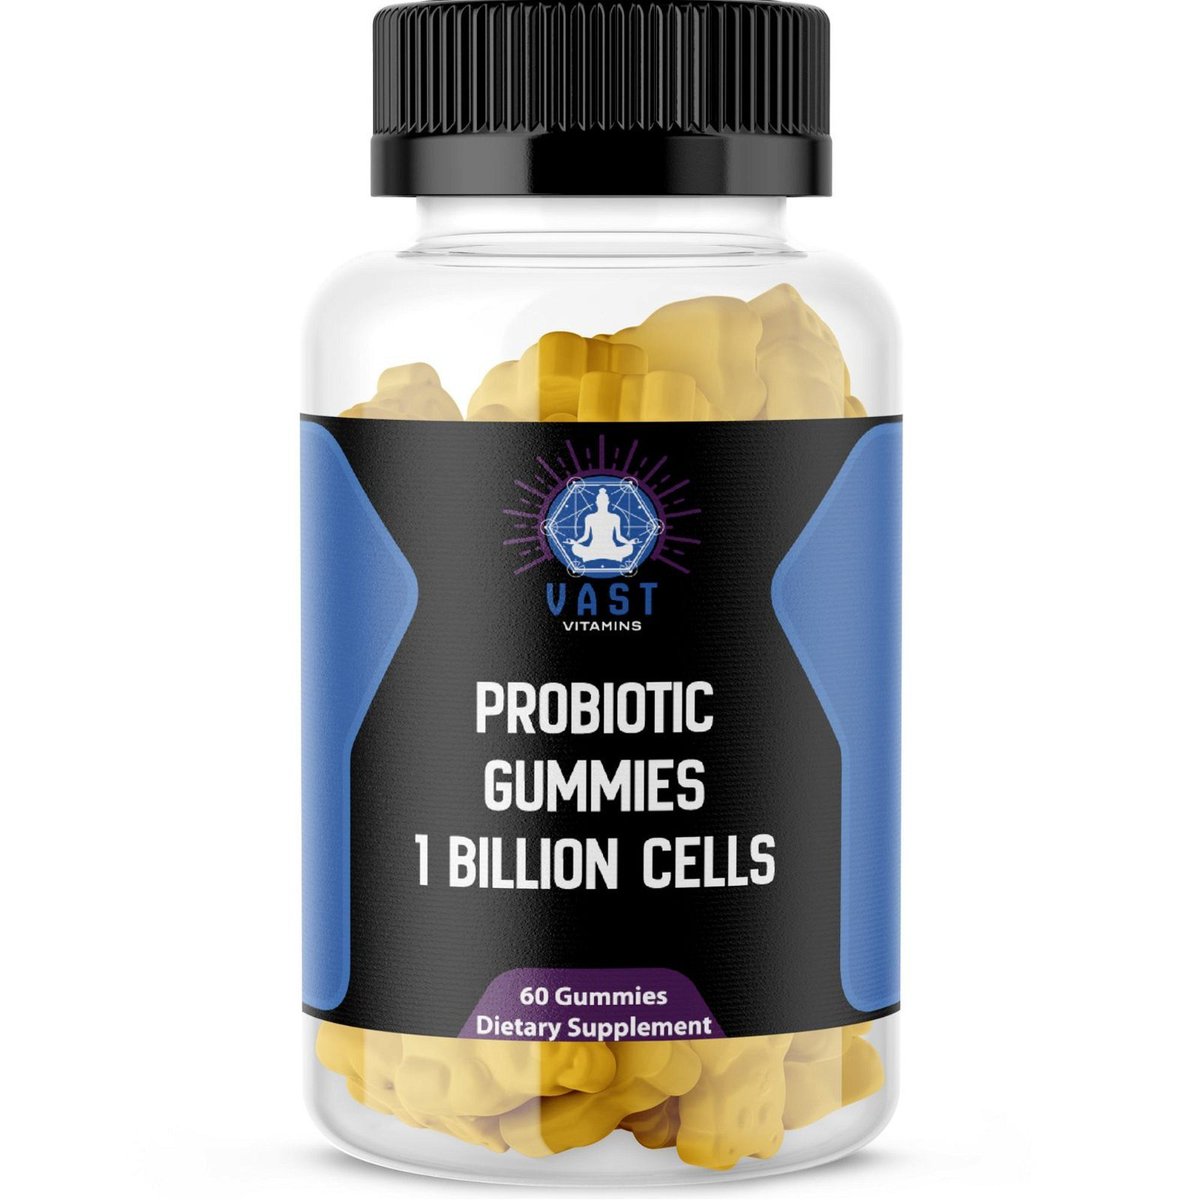 Support your gut health with Probotiotic Gummies 1 Billion Cells Gut Health Aid! 💁‍♀️ For just $24, get the most advanced probiotics to keep your gastrointestinal tract balanced and healthy. #guthealthaid #probiotics #gummies #1billioncells #balancedhealthy